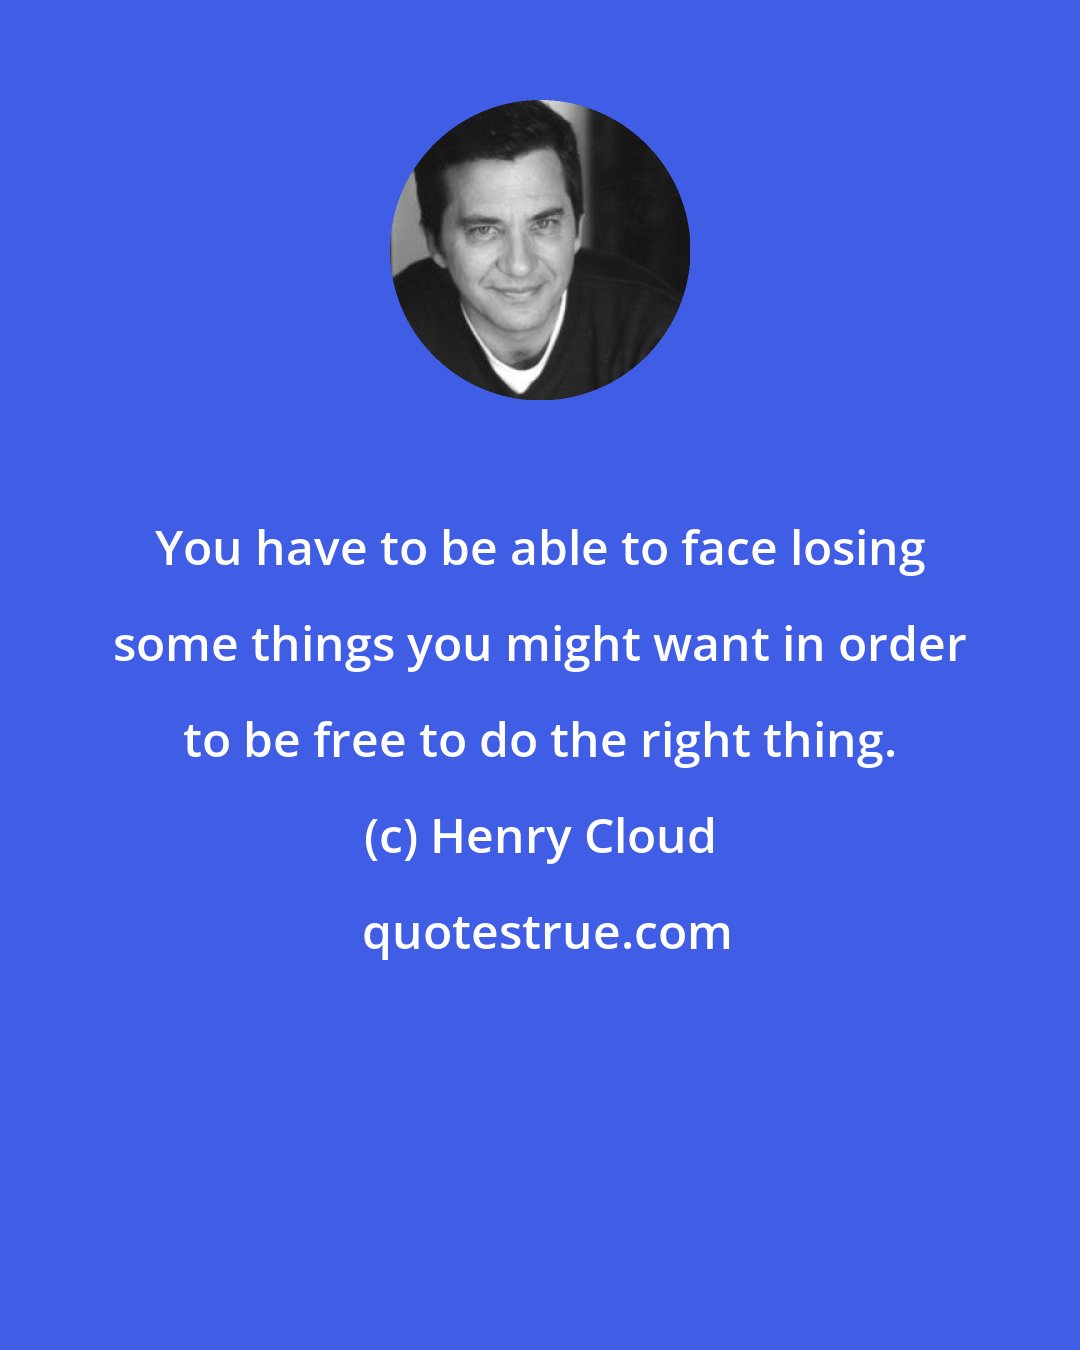 Henry Cloud: You have to be able to face losing some things you might want in order to be free to do the right thing.